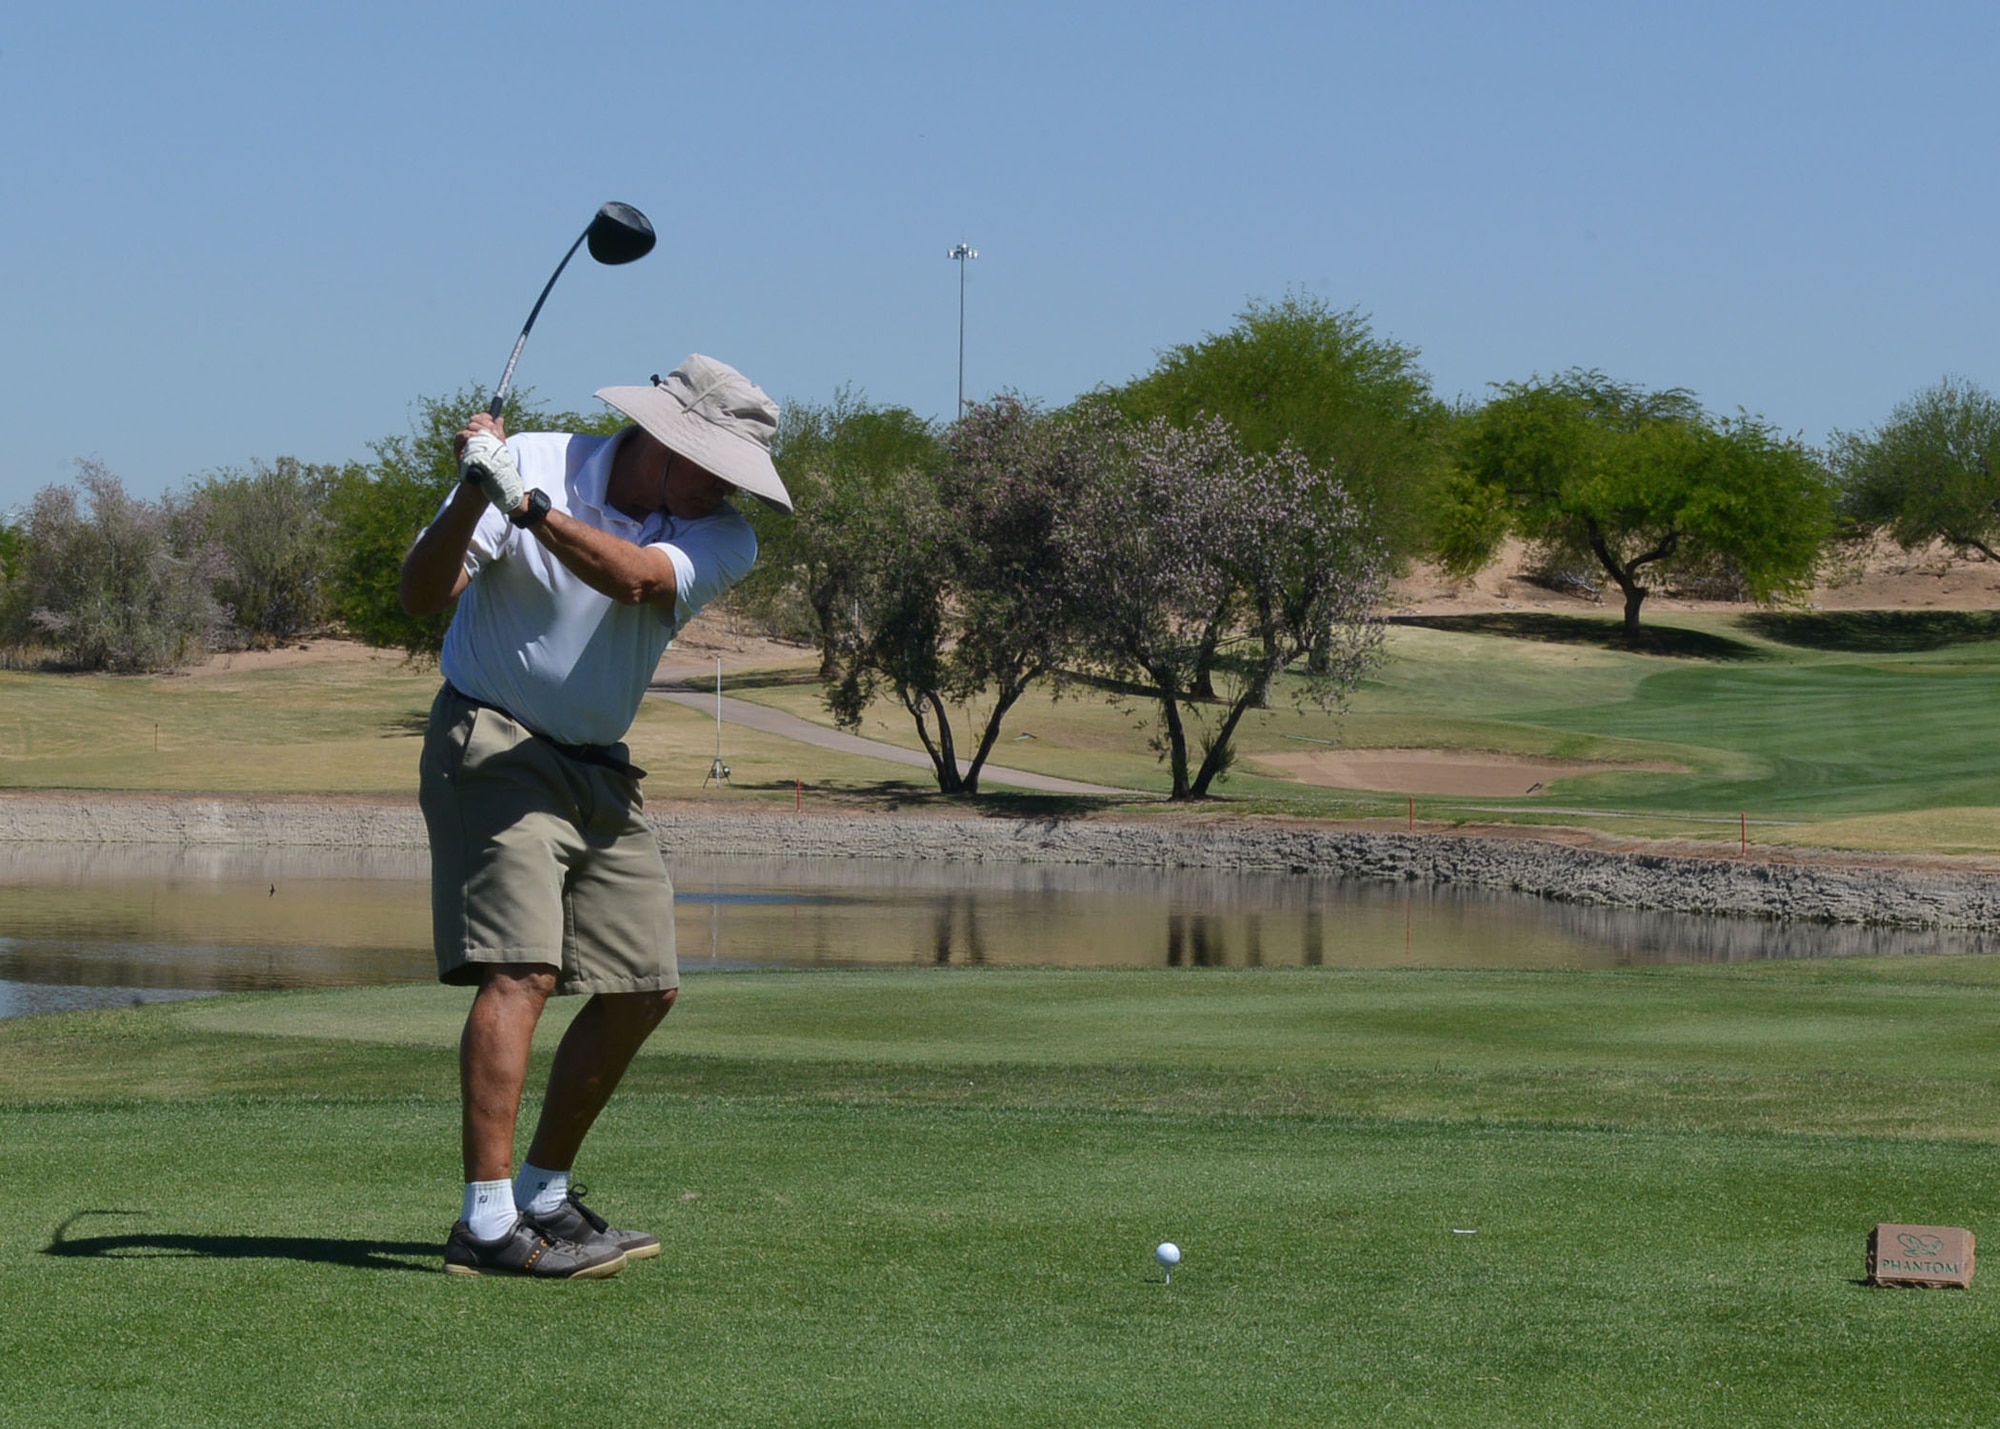 Retired Army Maj. Dick Lattin swings a golf club May 1, 2017, on Falcon Dunes Golf Course at Luke Air Force Base, Ariz. The Falcon Dunes Golf Course is open to the public May 1 through September 30. (U.S. Air Force photo by Senior Airman James Hensley)